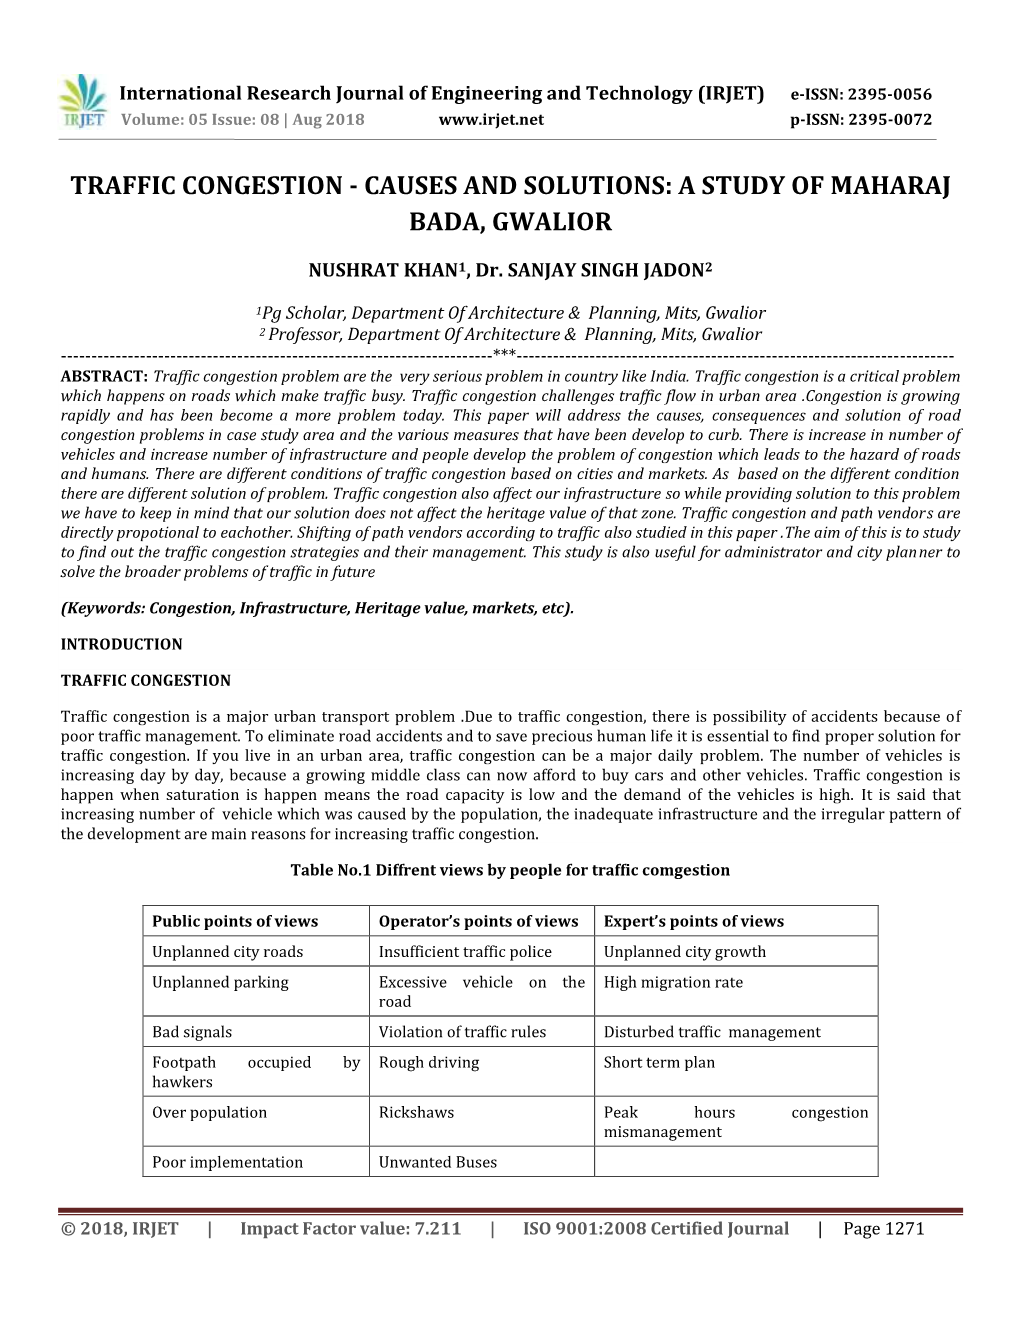 Traffic Congestion - Causes and Solutions: a Study of Maharaj Bada, Gwalior